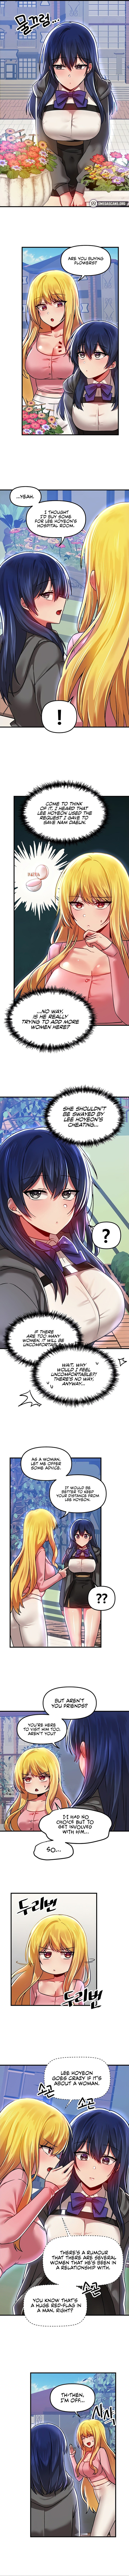 trapped-in-the-academys-eroge-chap-69-6